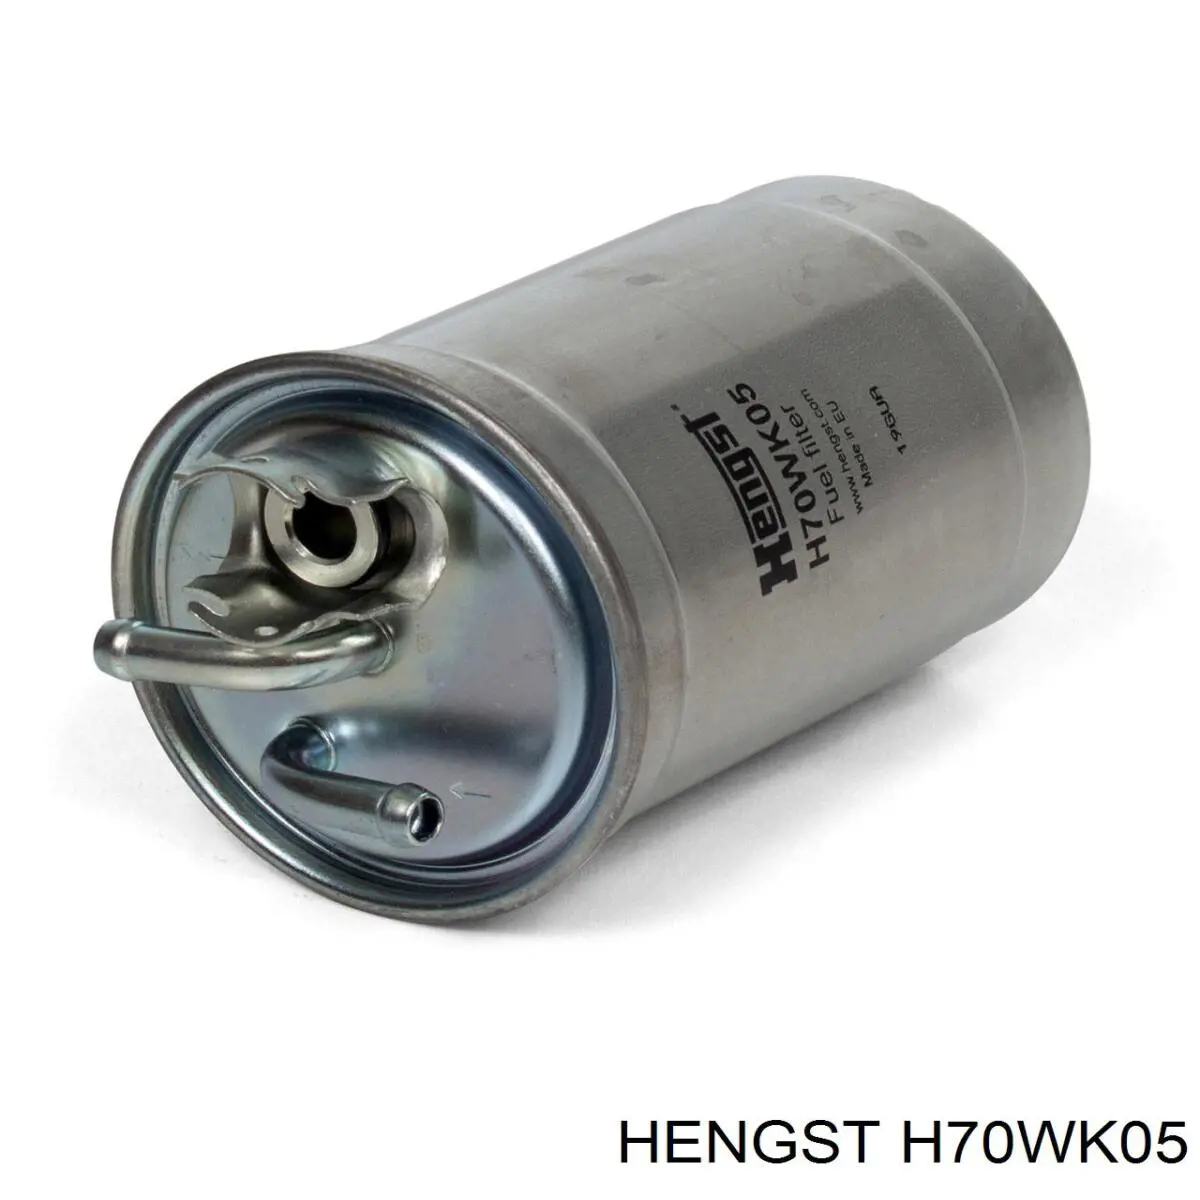 Filtro combustible H70WK05 Hengst